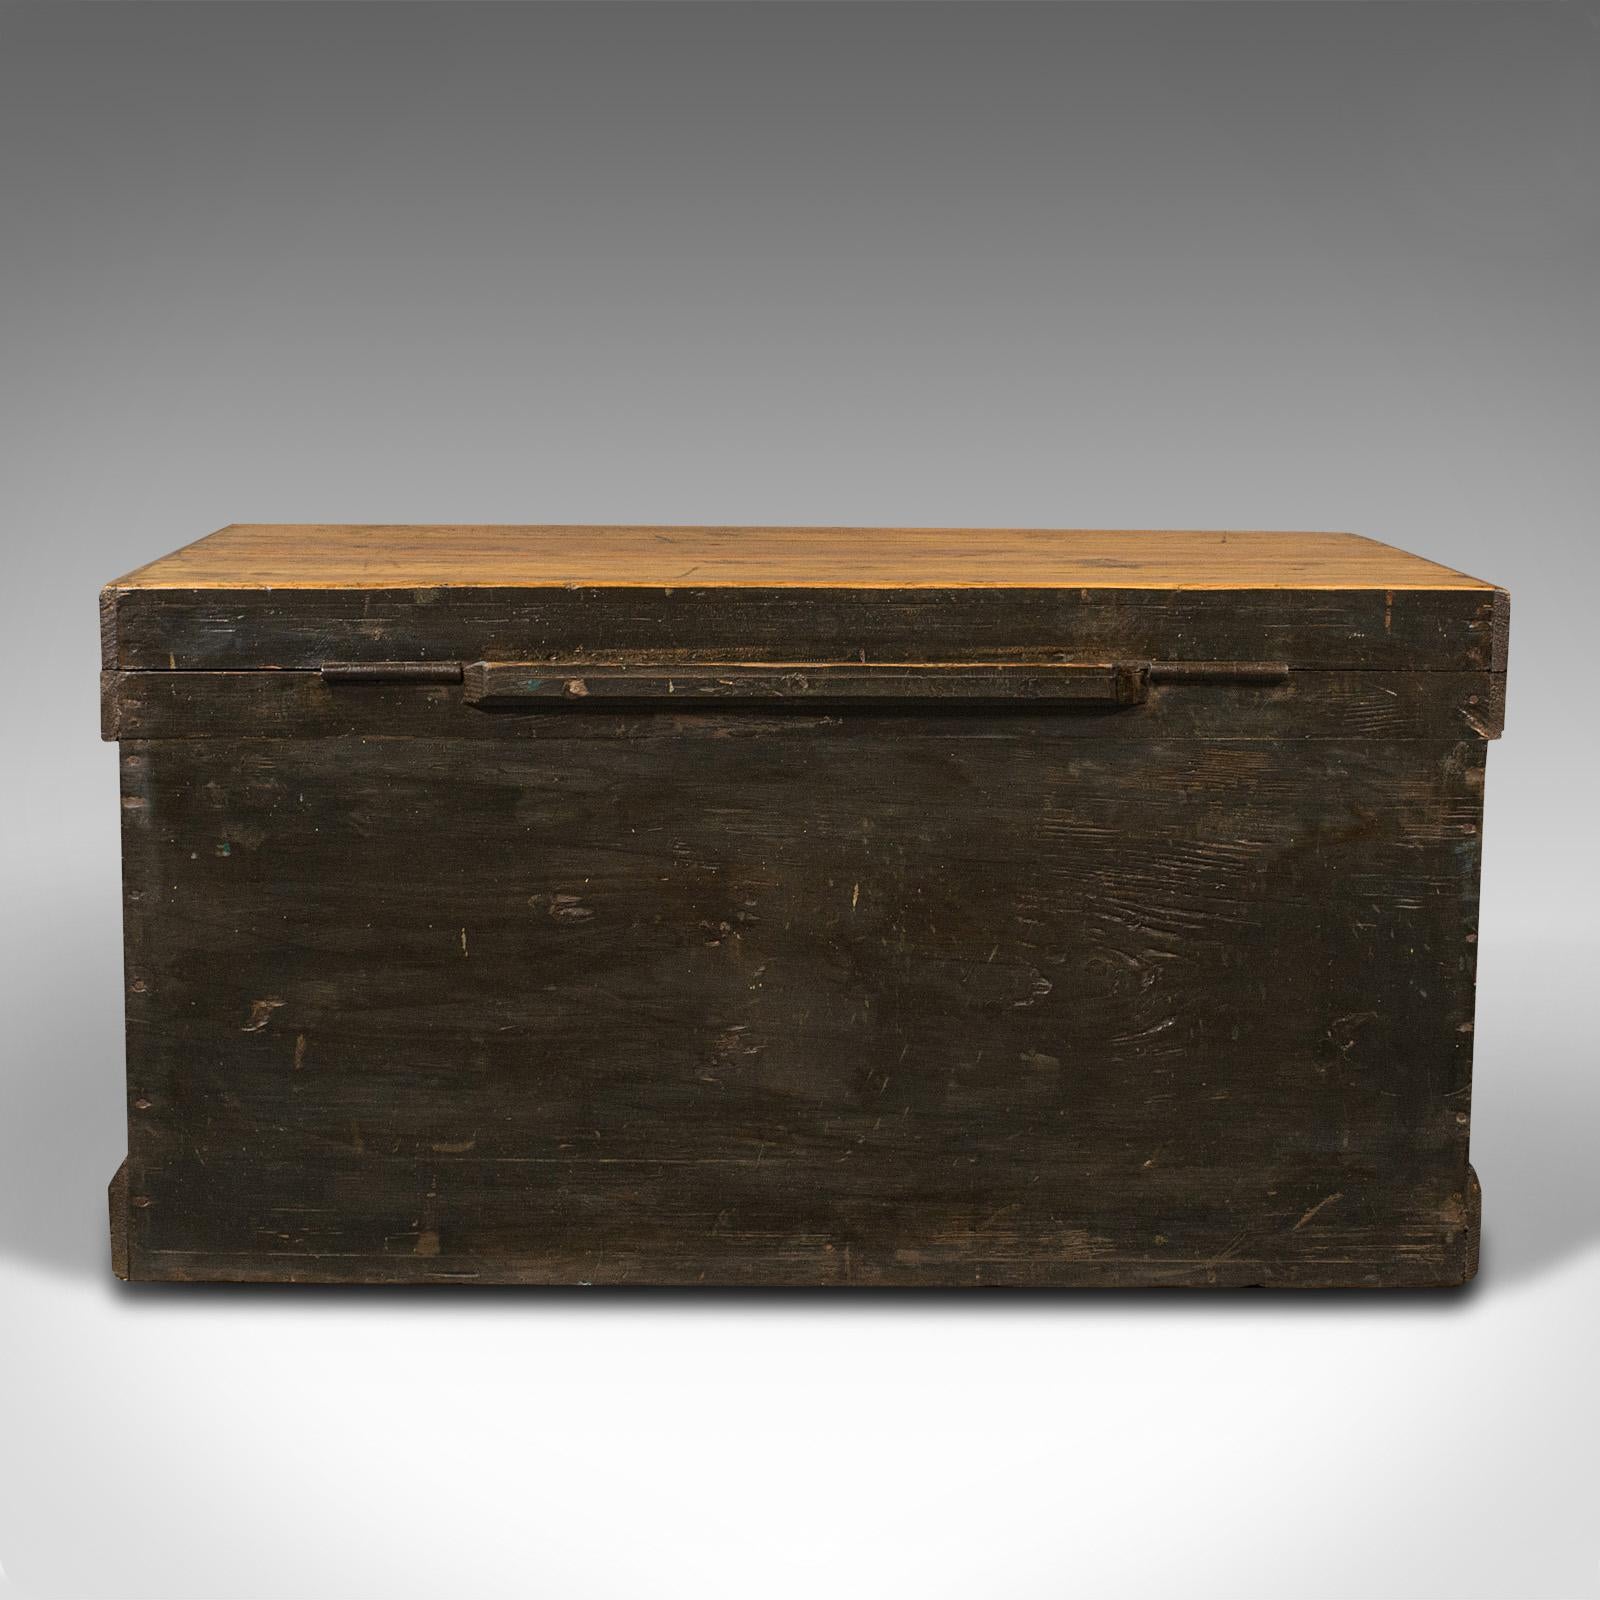 Antique Shipwright's Chest, English, Pine, Maritime, Tool Trunk, Victorian, 1900 1